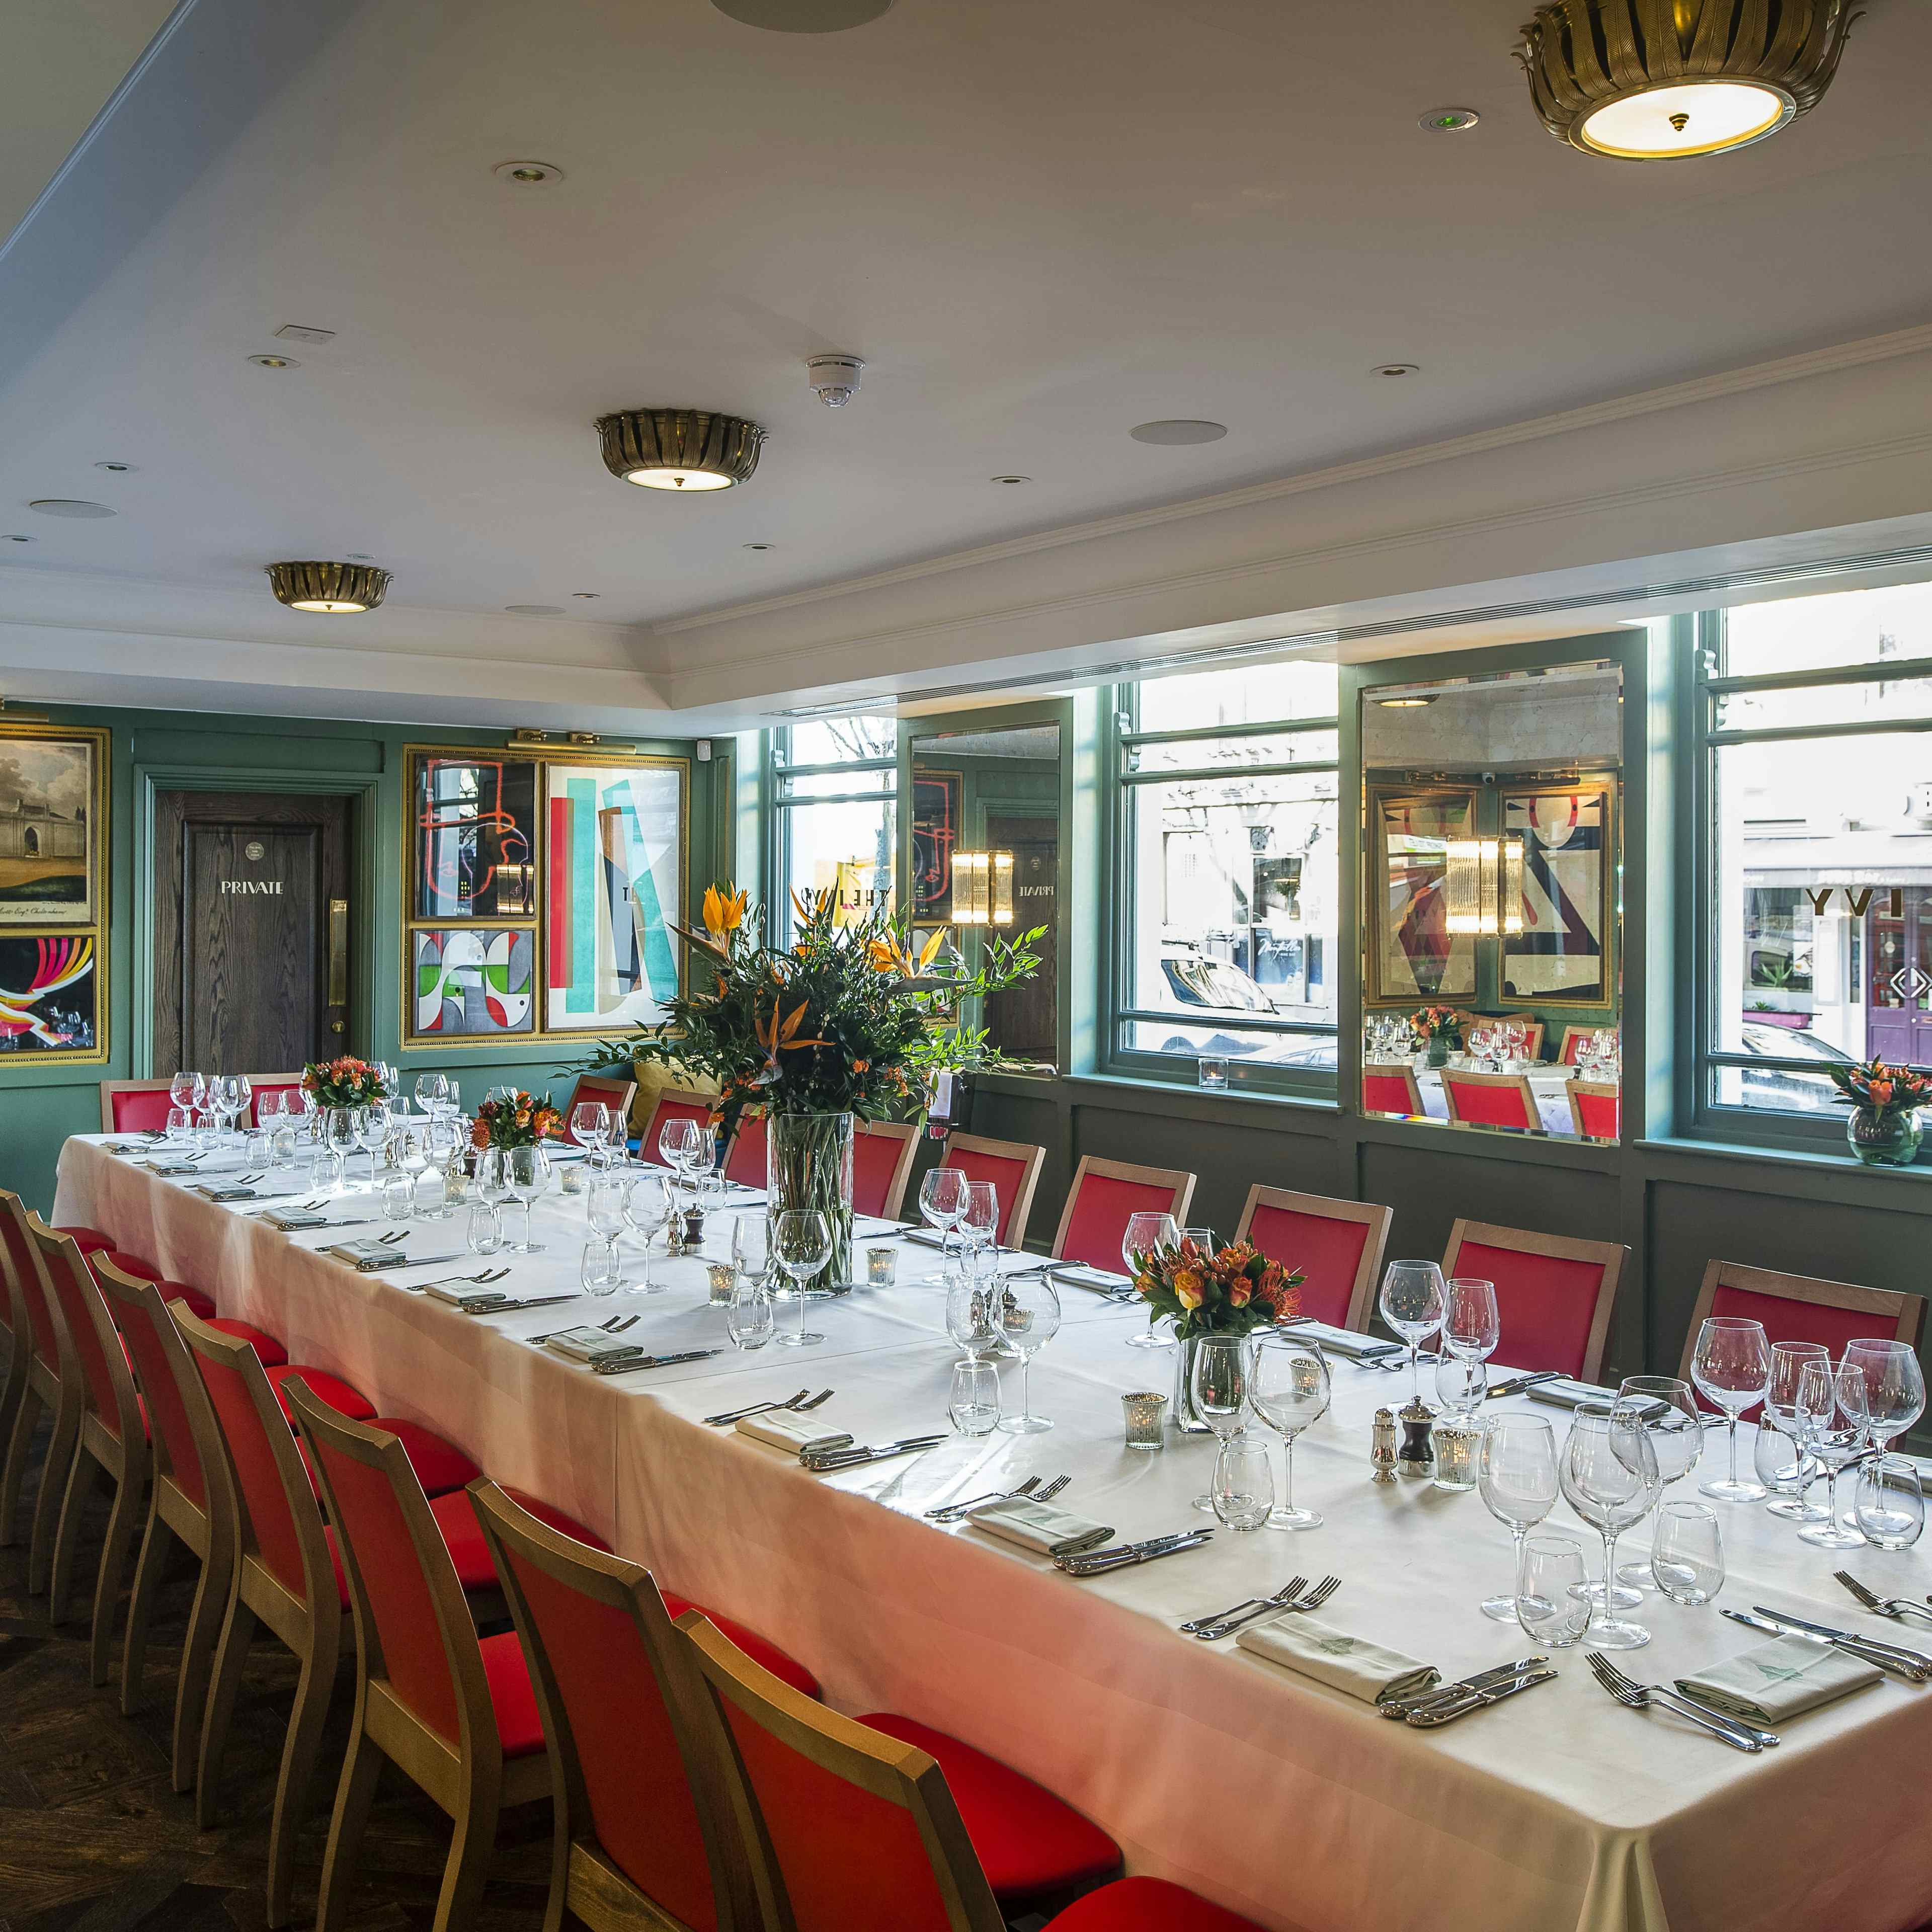  The Ivy Montpellier Brasserie - The Papworth Room image 2